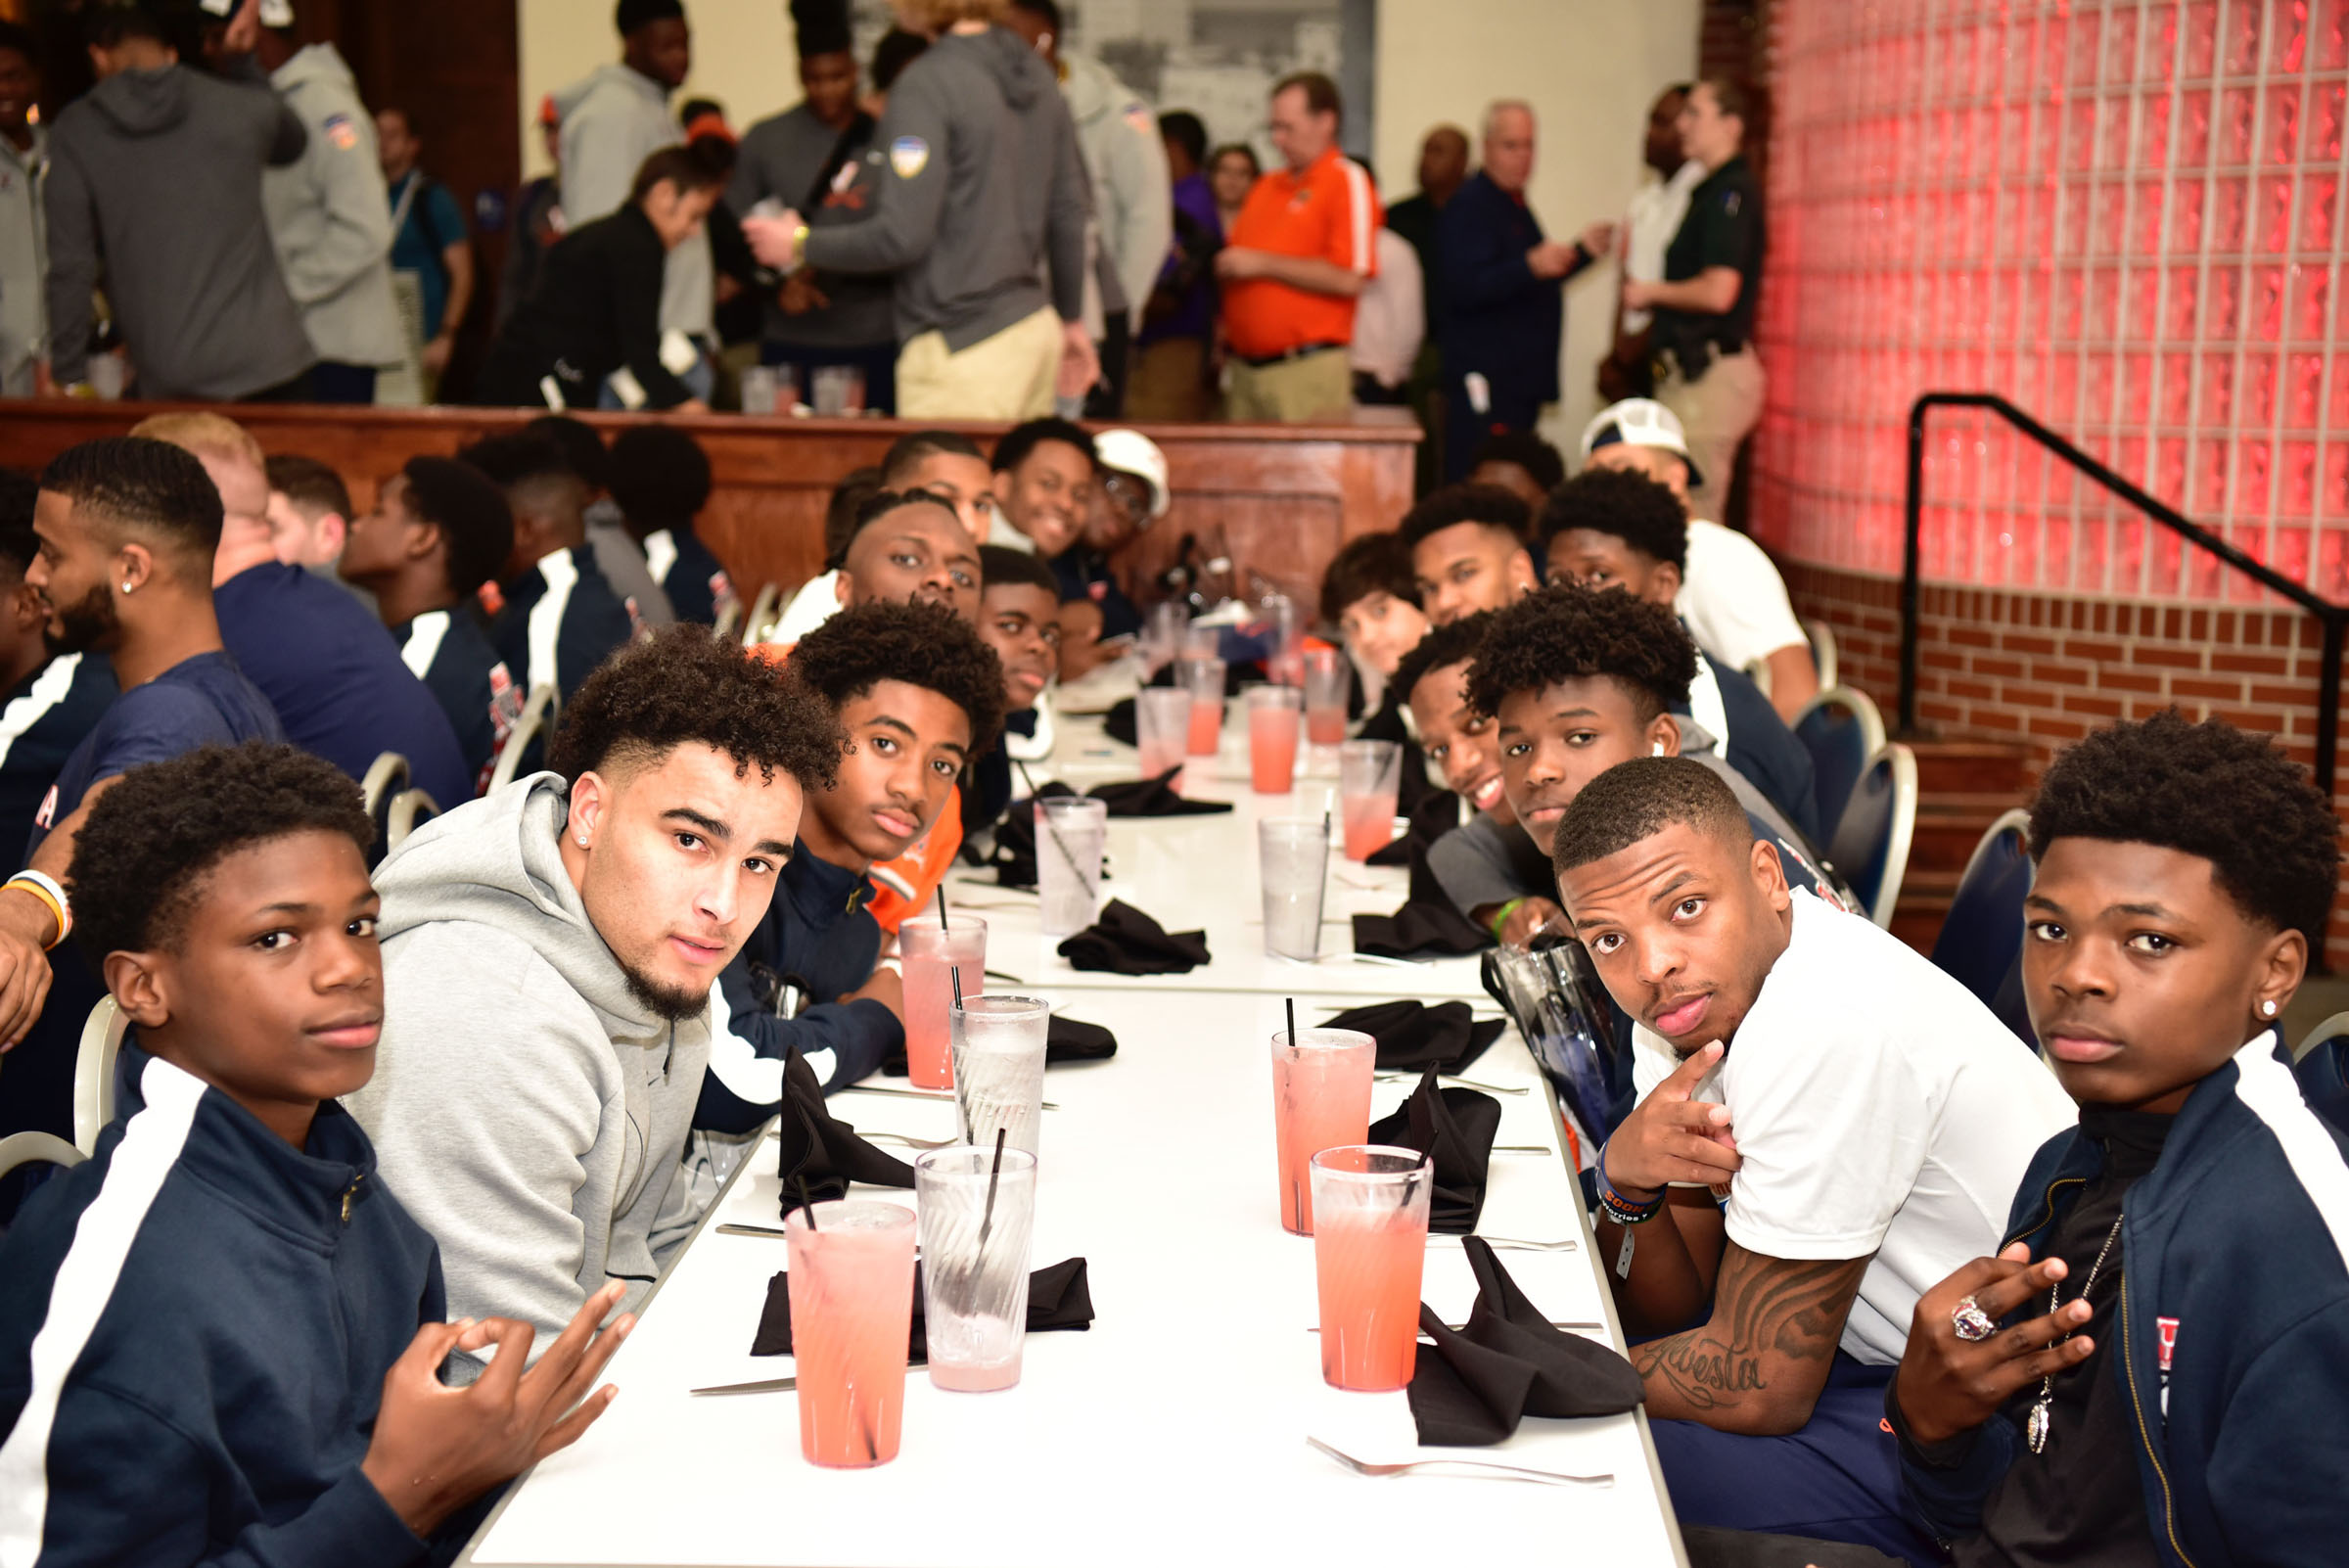 UVA football team sitting at a table with members of the Florida youth Football League